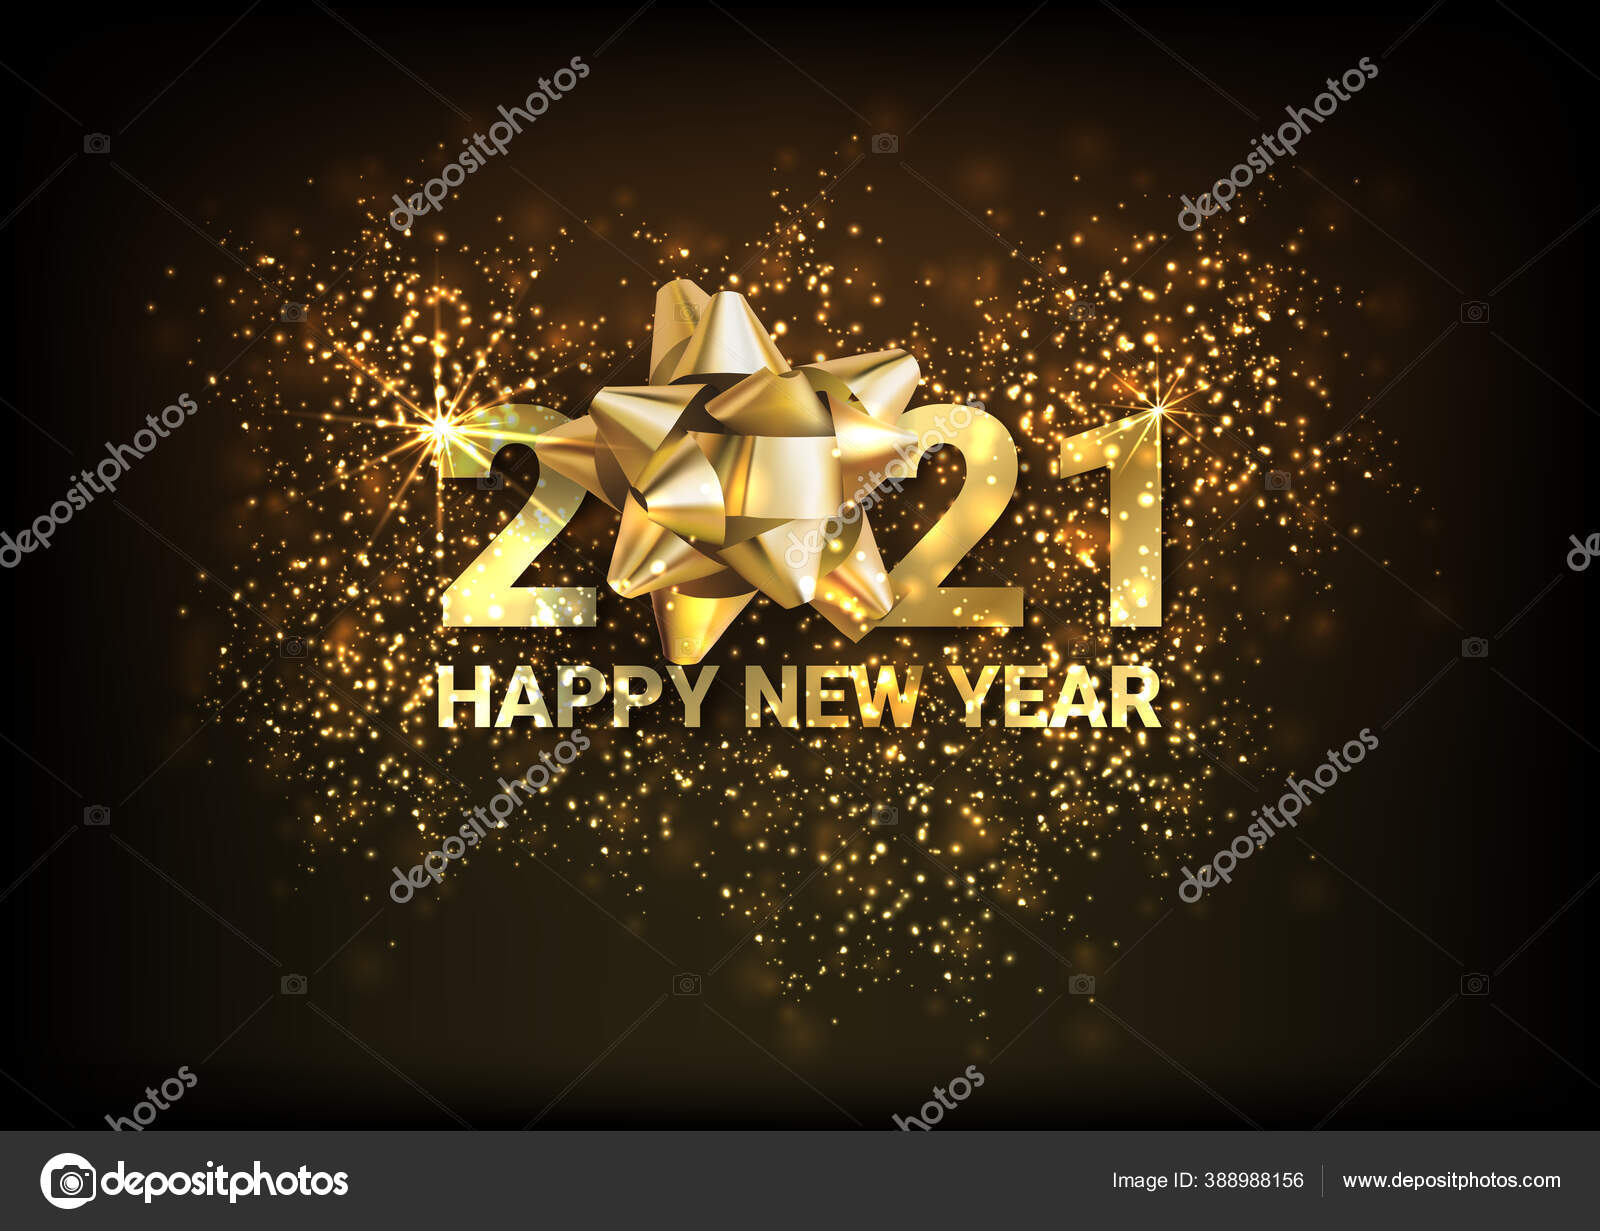 Greeting Card Happy New Year 2021 Beautiful Square Holiday Web Stock Vector C Liurii 86 Gmail Com 388988156